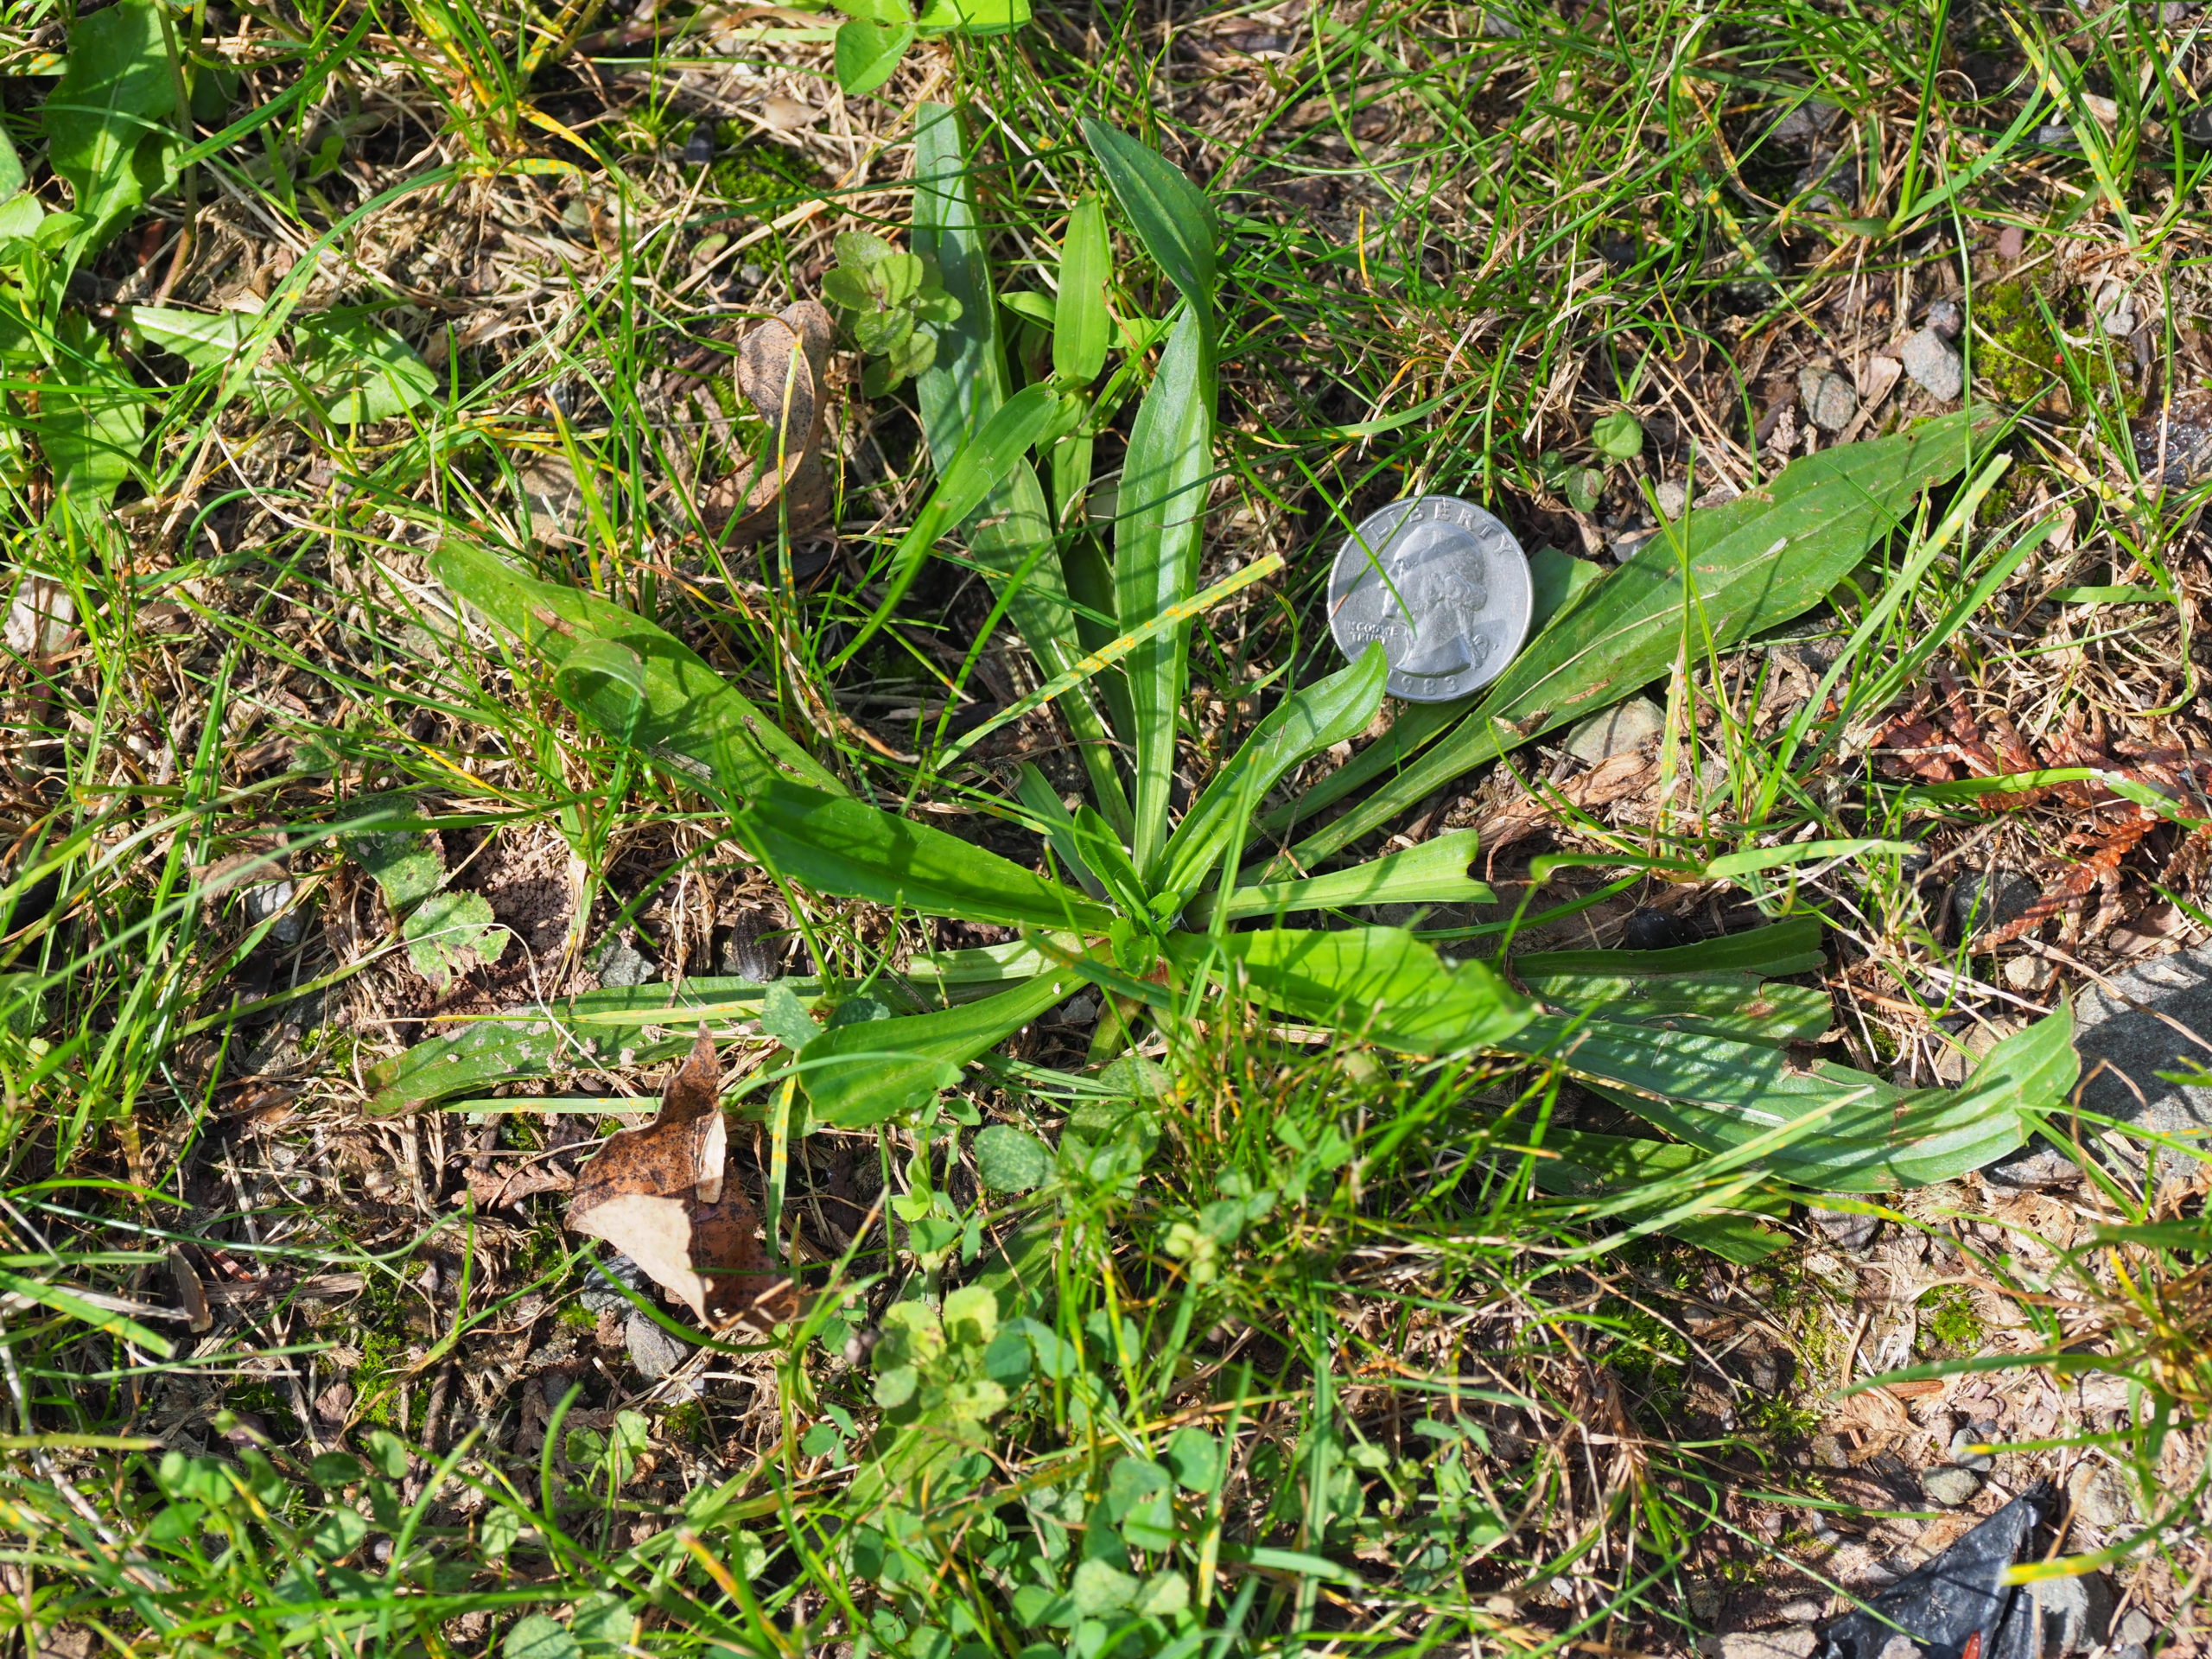 This is a narrow-leaf plantain. Note how it’s growing in a bare spot in the lawn, where weeds thrive. This is a 2-year-old plant ready to flower and drop seeds. A simple weeding tool will lift the plant and its roots right out of the ground where it can be left to dry and die.